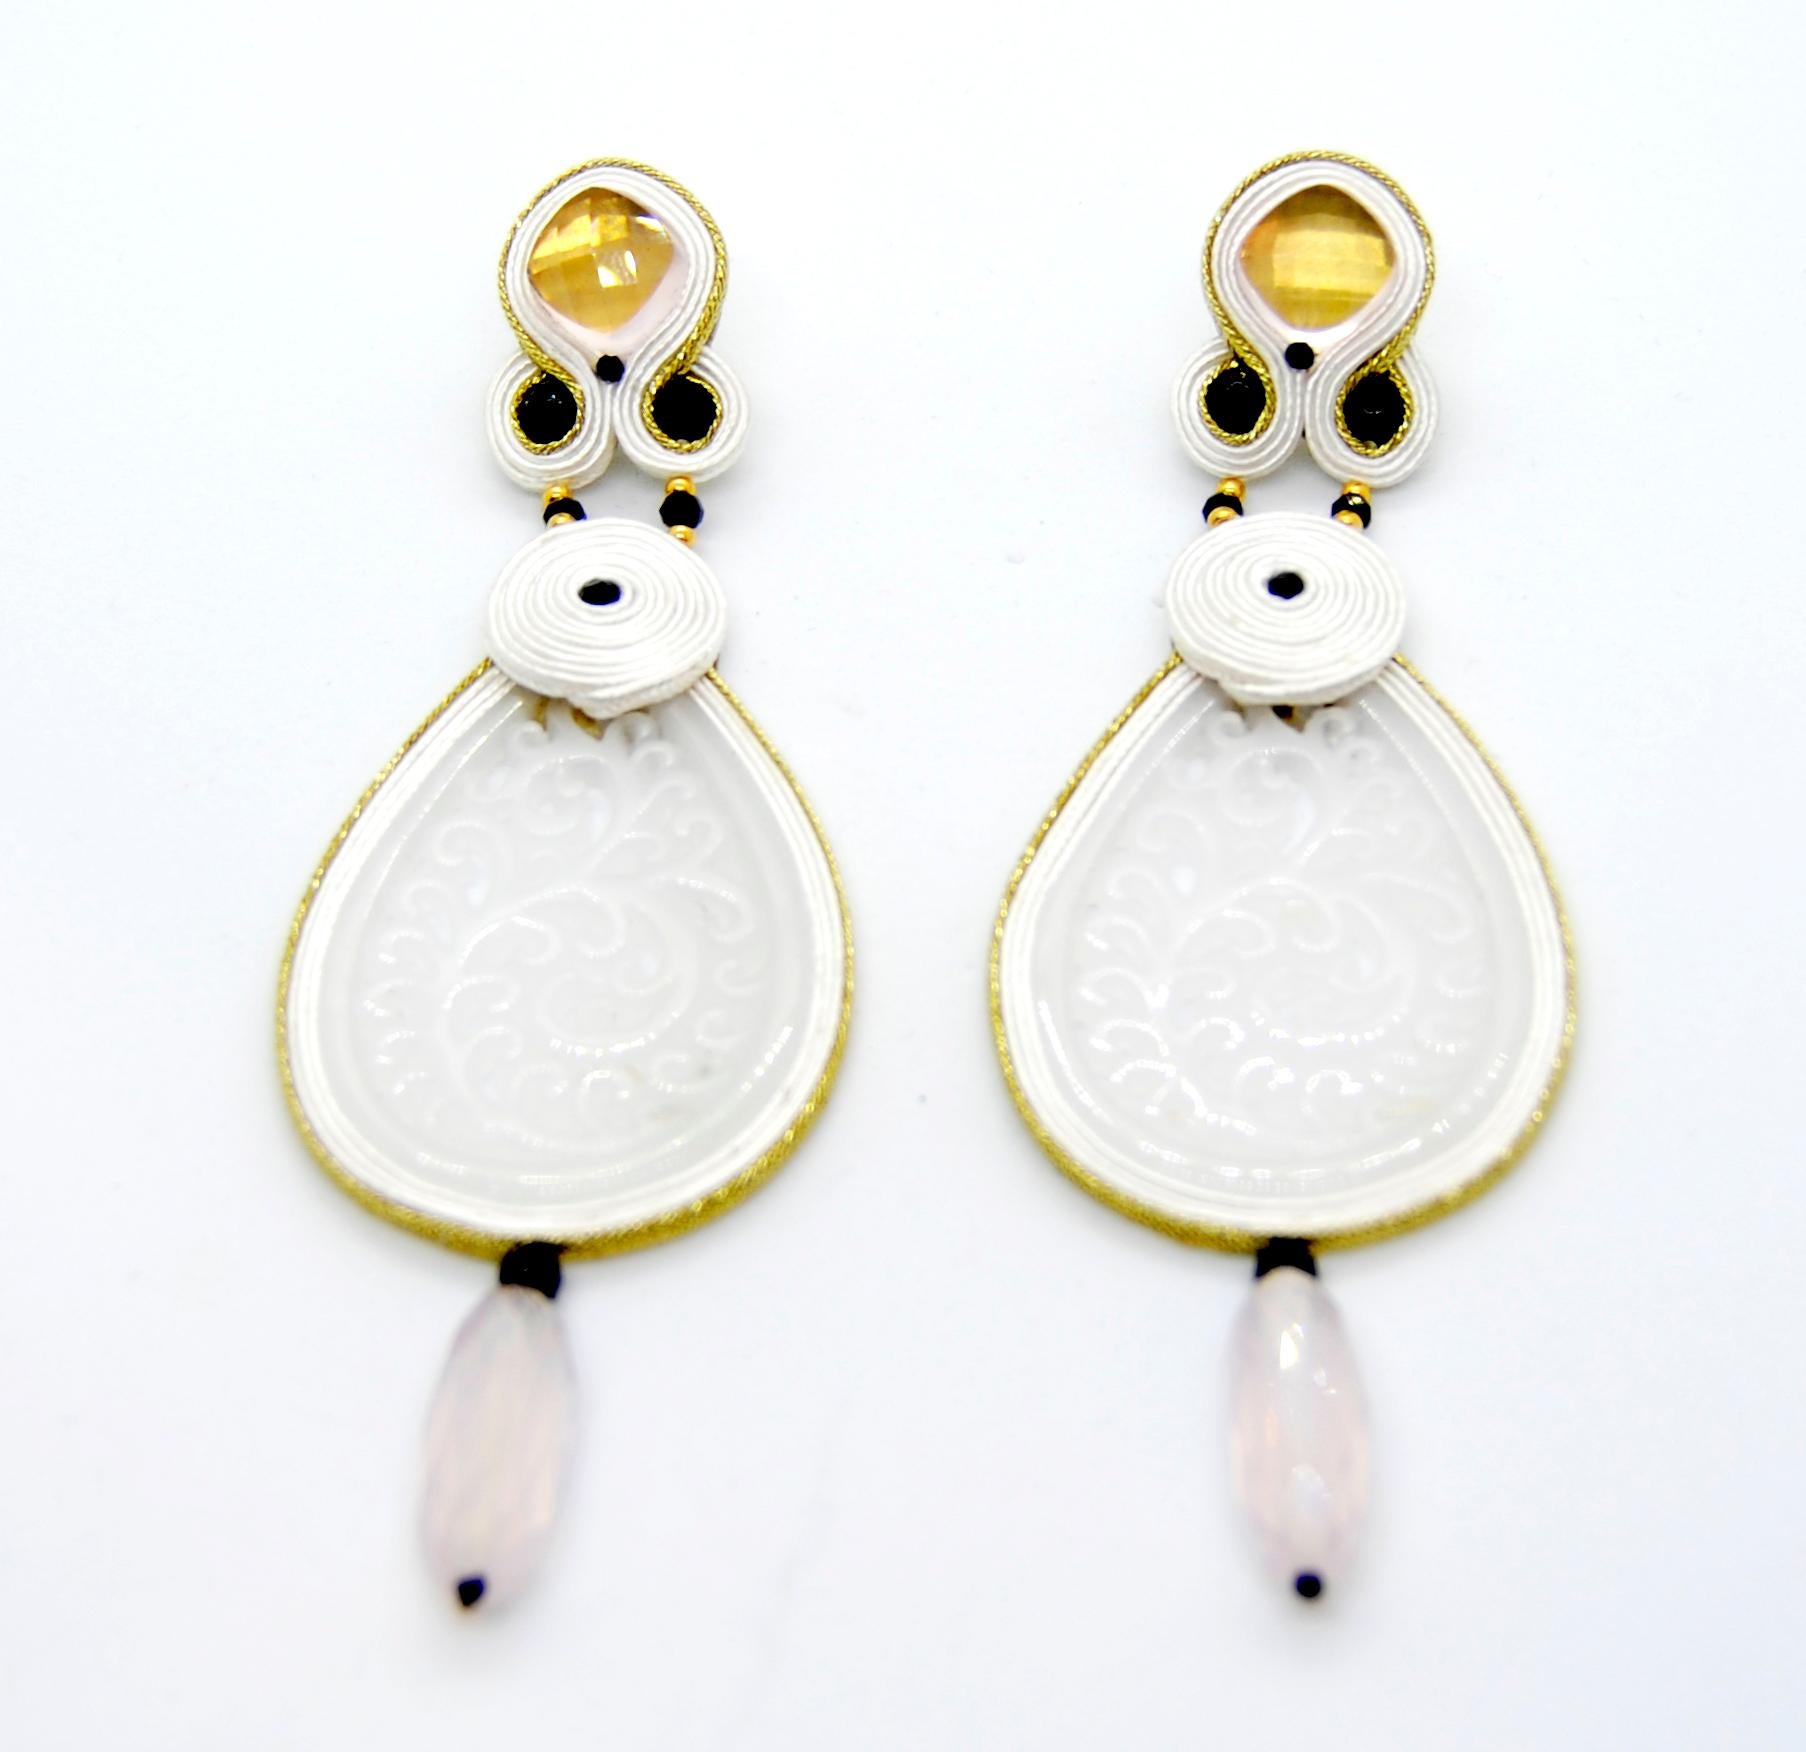 Soutache Technique earrings a Joint venture of Joyería Pradera and Musula Jewels where they create Colourful, 
Lively and Light Travel Jewelry that has an Iconic touch and give a modern and cool  touch to every look. 
Head of Nudo shape white